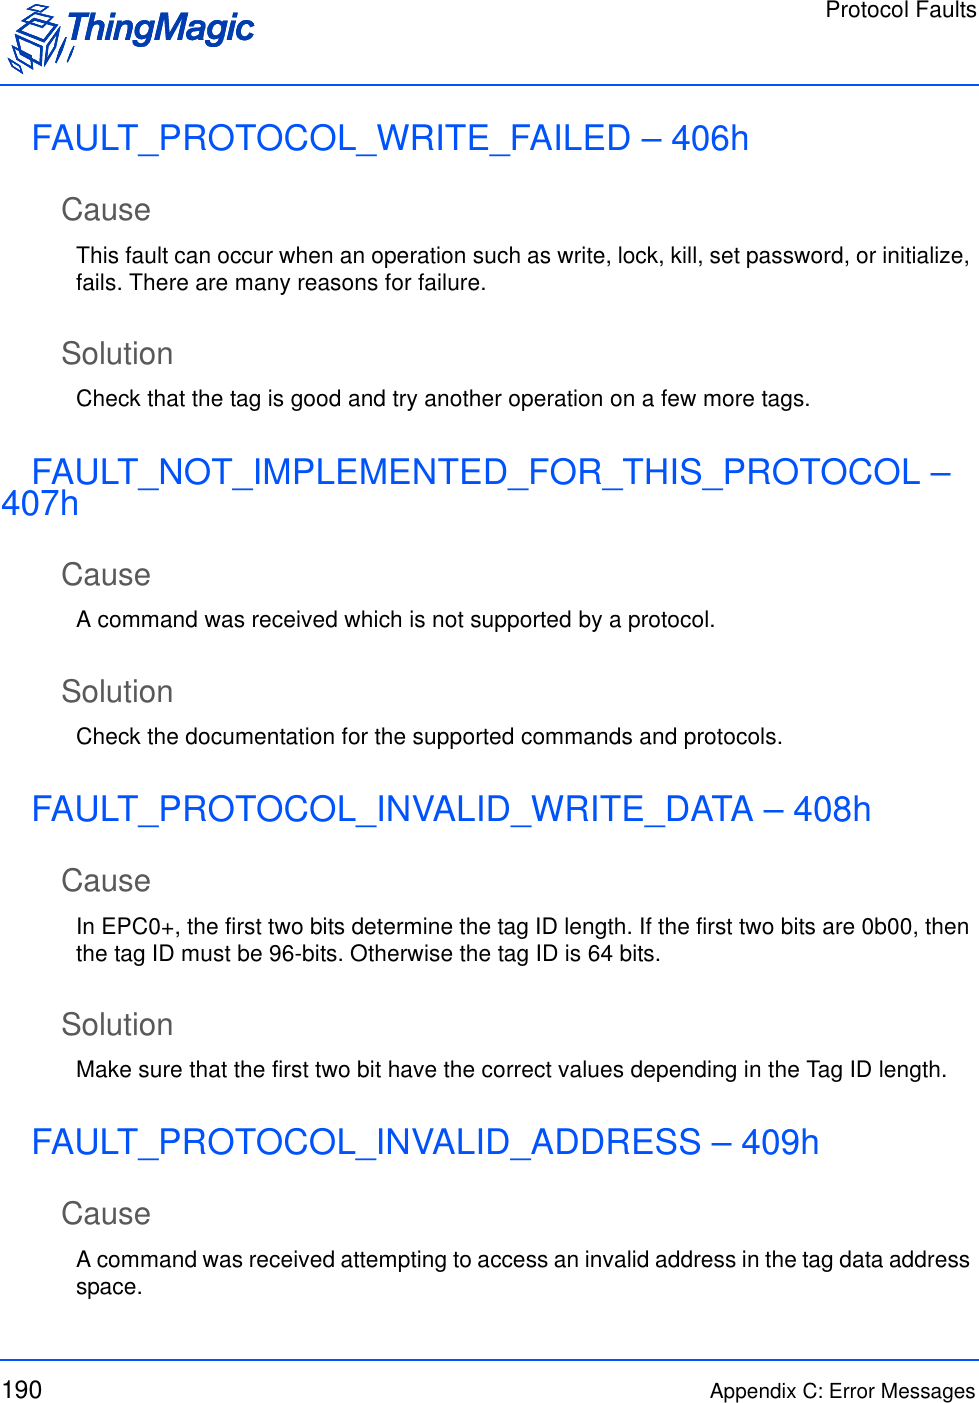 Protocol Faults190 Appendix C: Error MessagesFAULT_PROTOCOL_WRITE_FAILED – 406hCauseThis fault can occur when an operation such as write, lock, kill, set password, or initialize, fails. There are many reasons for failure.SolutionCheck that the tag is good and try another operation on a few more tags.FAULT_NOT_IMPLEMENTED_FOR_THIS_PROTOCOL – 407hCauseA command was received which is not supported by a protocol.SolutionCheck the documentation for the supported commands and protocols.FAULT_PROTOCOL_INVALID_WRITE_DATA – 408hCauseIn EPC0+, the first two bits determine the tag ID length. If the first two bits are 0b00, then the tag ID must be 96-bits. Otherwise the tag ID is 64 bits.SolutionMake sure that the first two bit have the correct values depending in the Tag ID length.FAULT_PROTOCOL_INVALID_ADDRESS – 409hCauseA command was received attempting to access an invalid address in the tag data address space. 